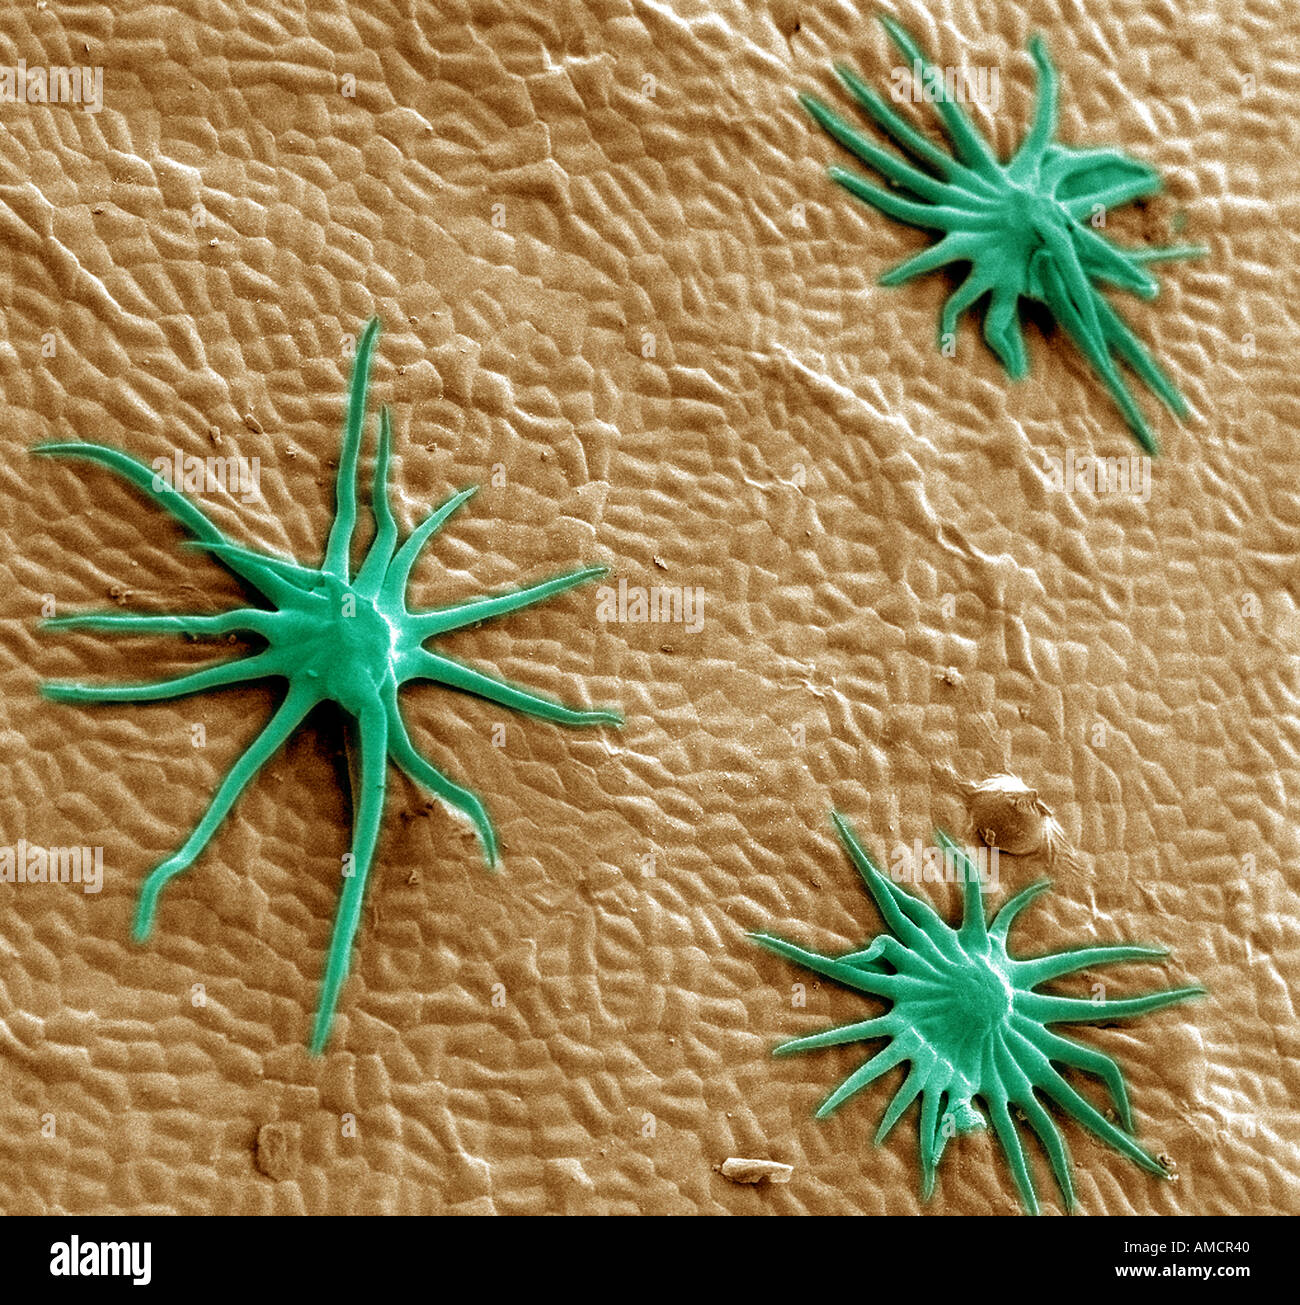 SEM x100 - Autumn olive leaf (critical point dried) adaxial view Stock Photo